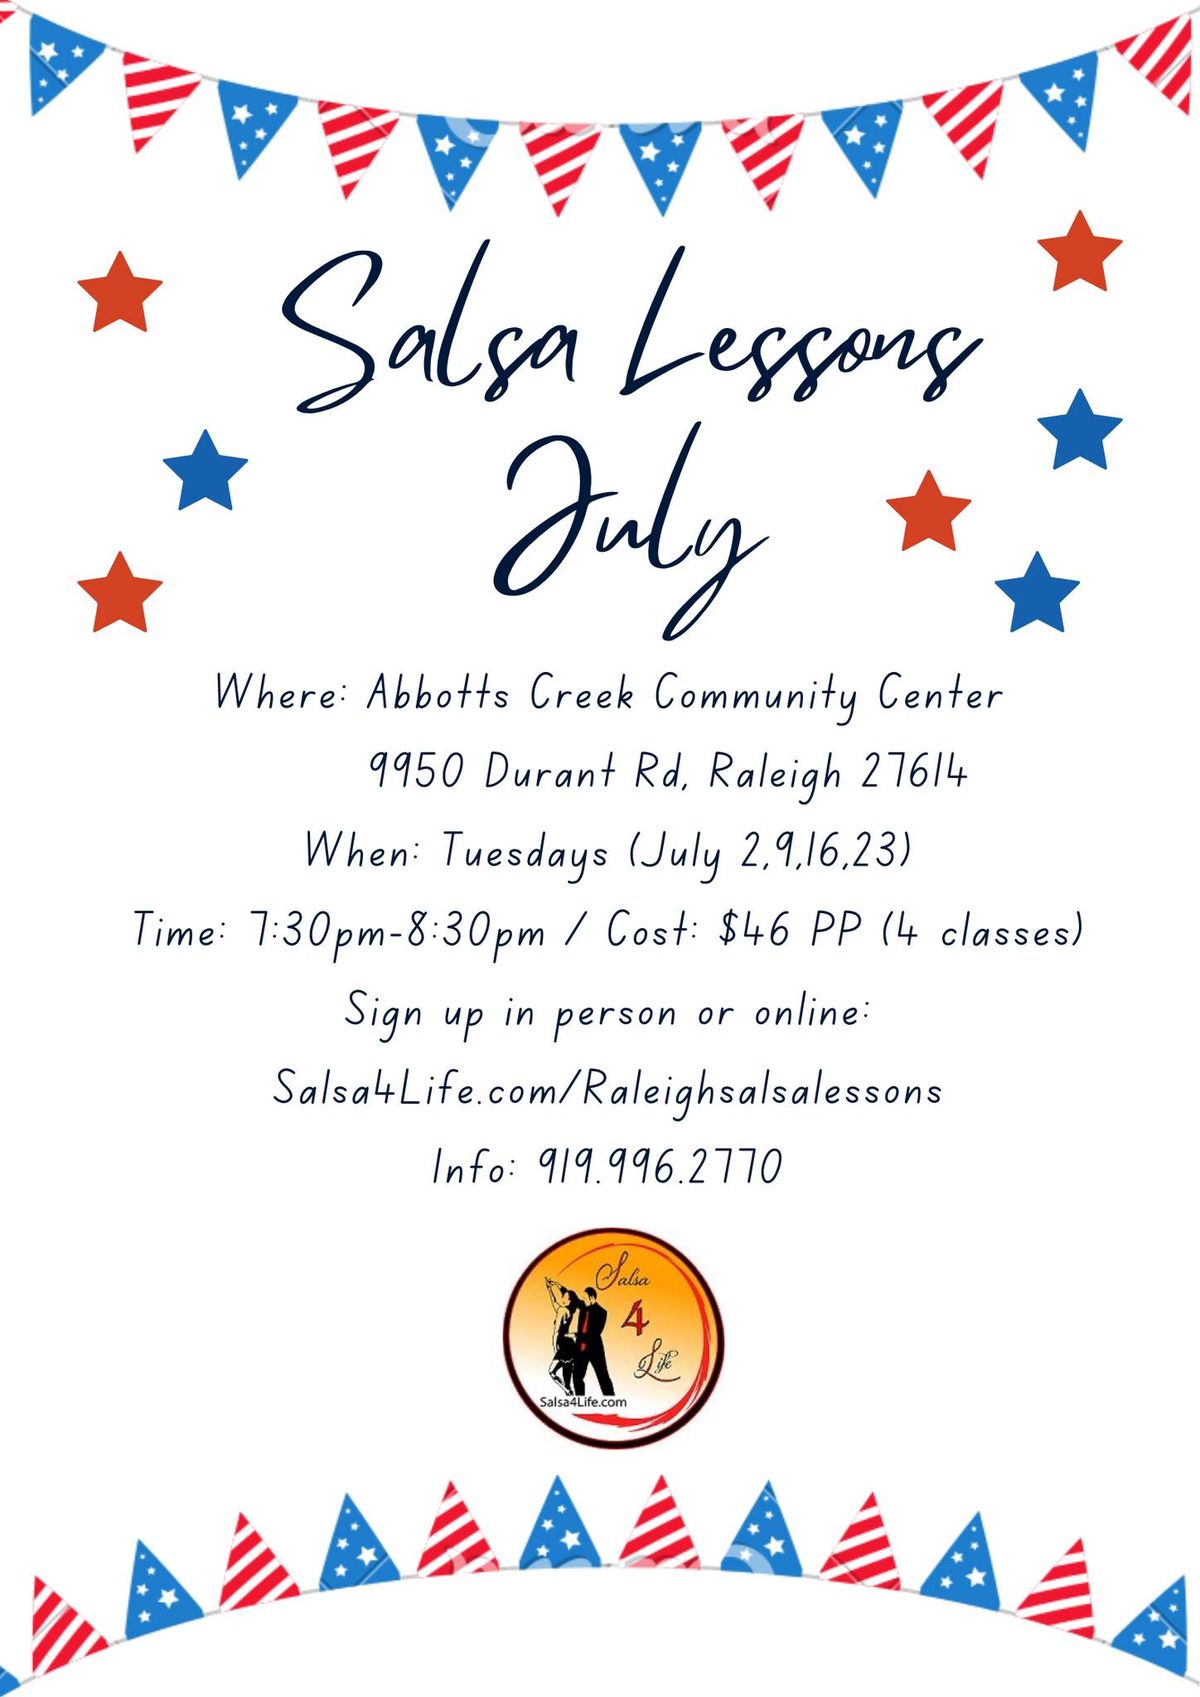 Salsa Lessons in July -Tuesdays!